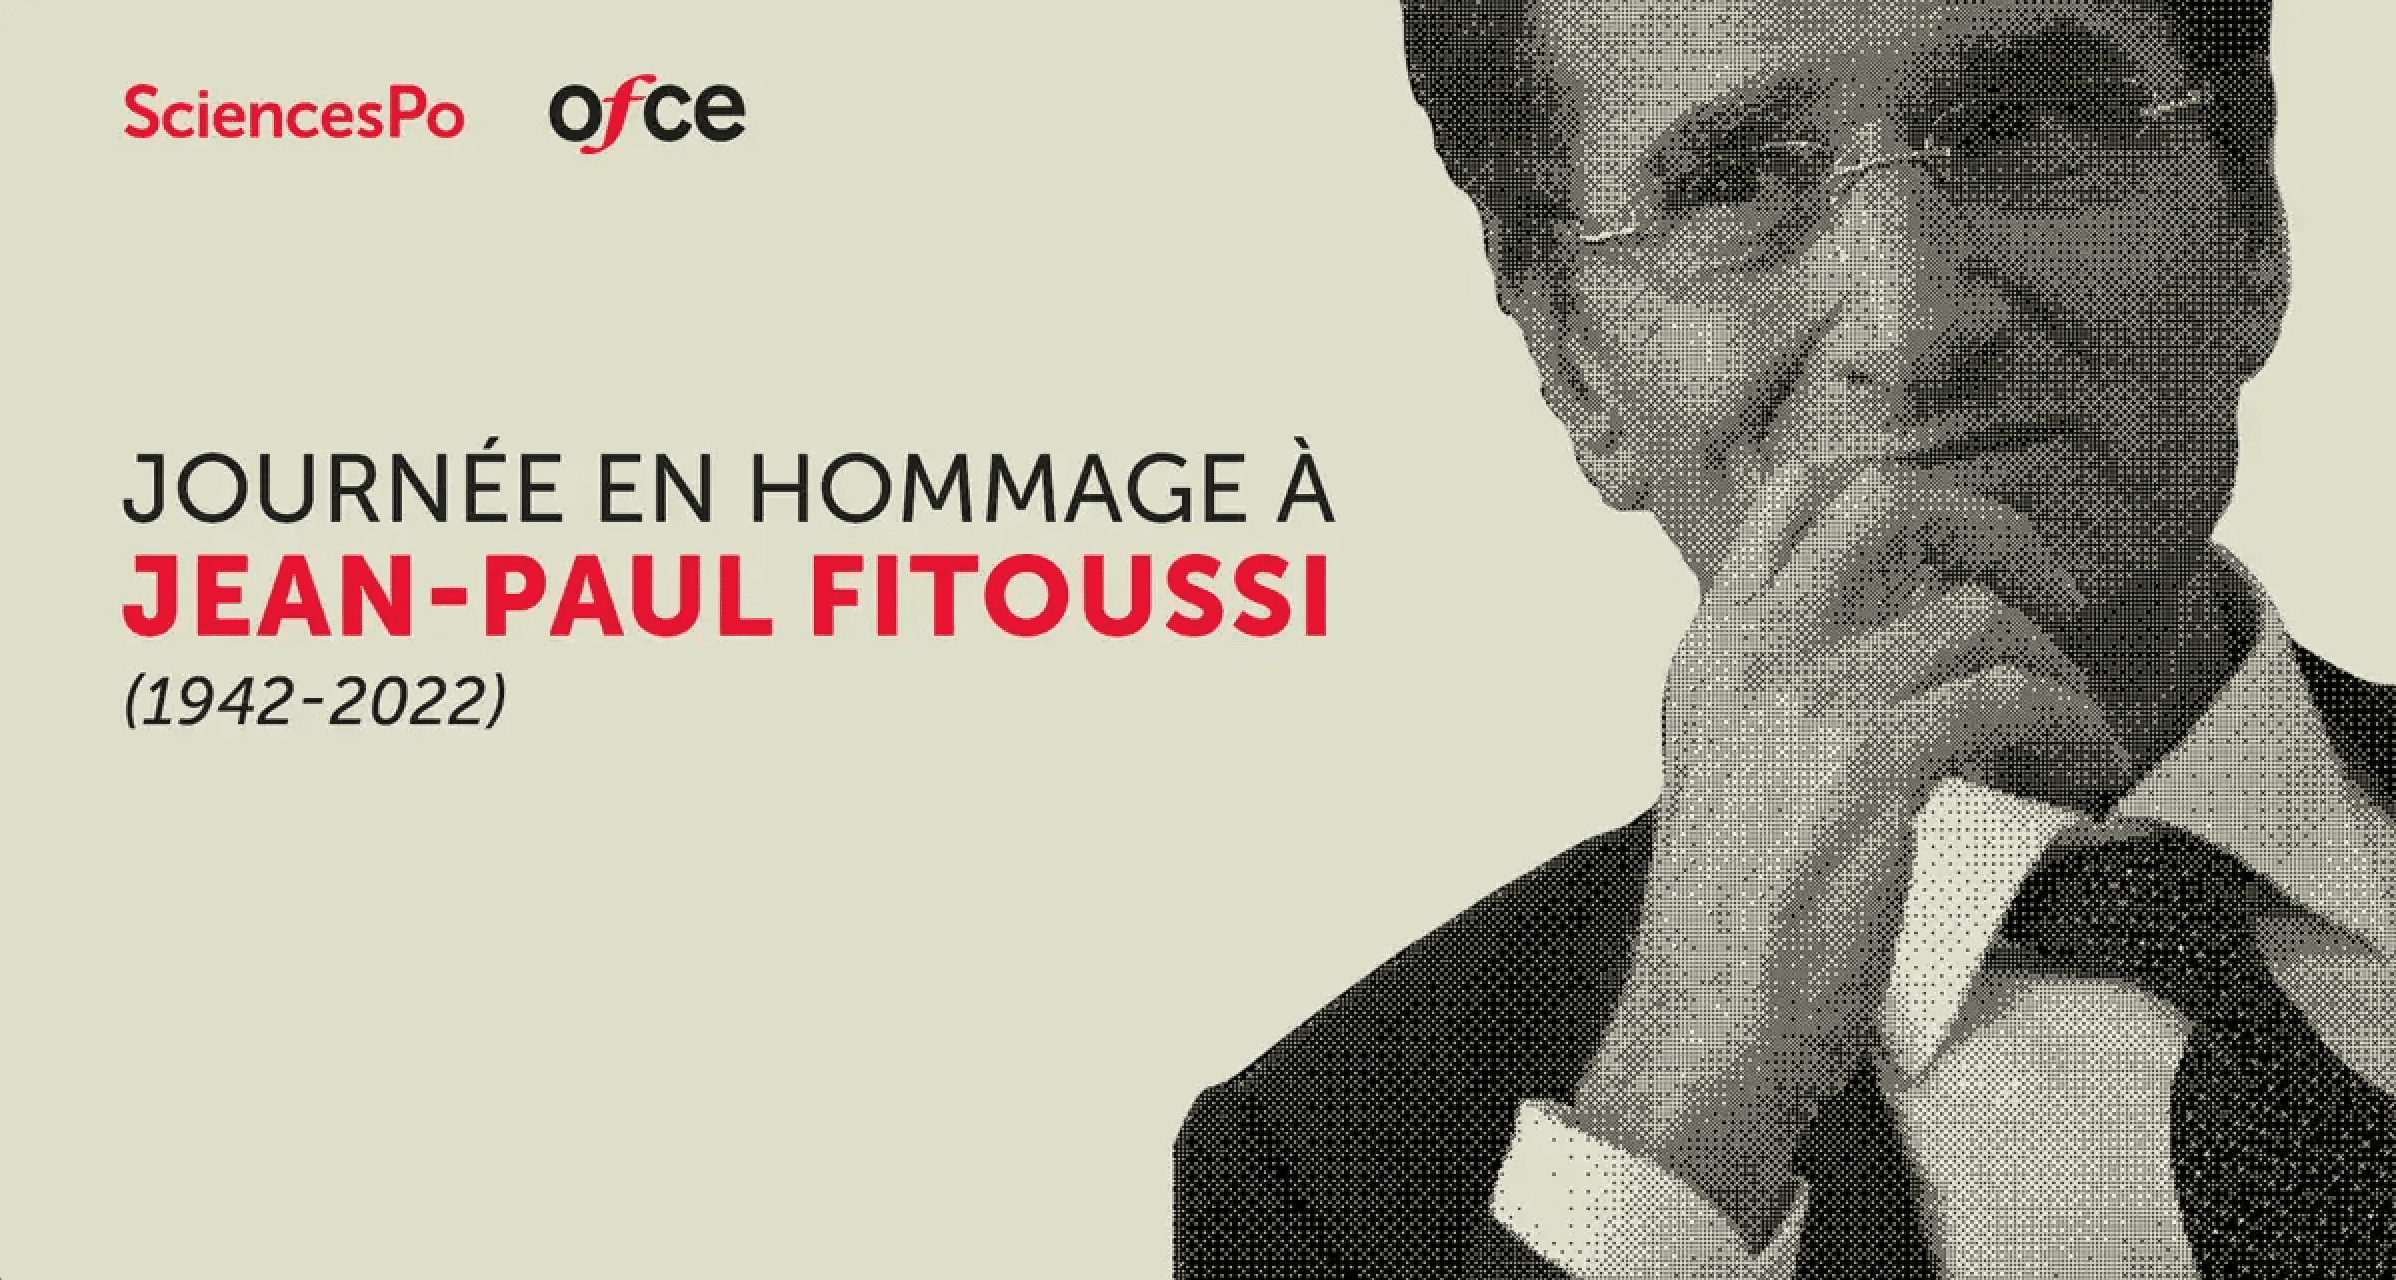 Invitation for day of tribute and portrait of Jean-Paul Fitoussi